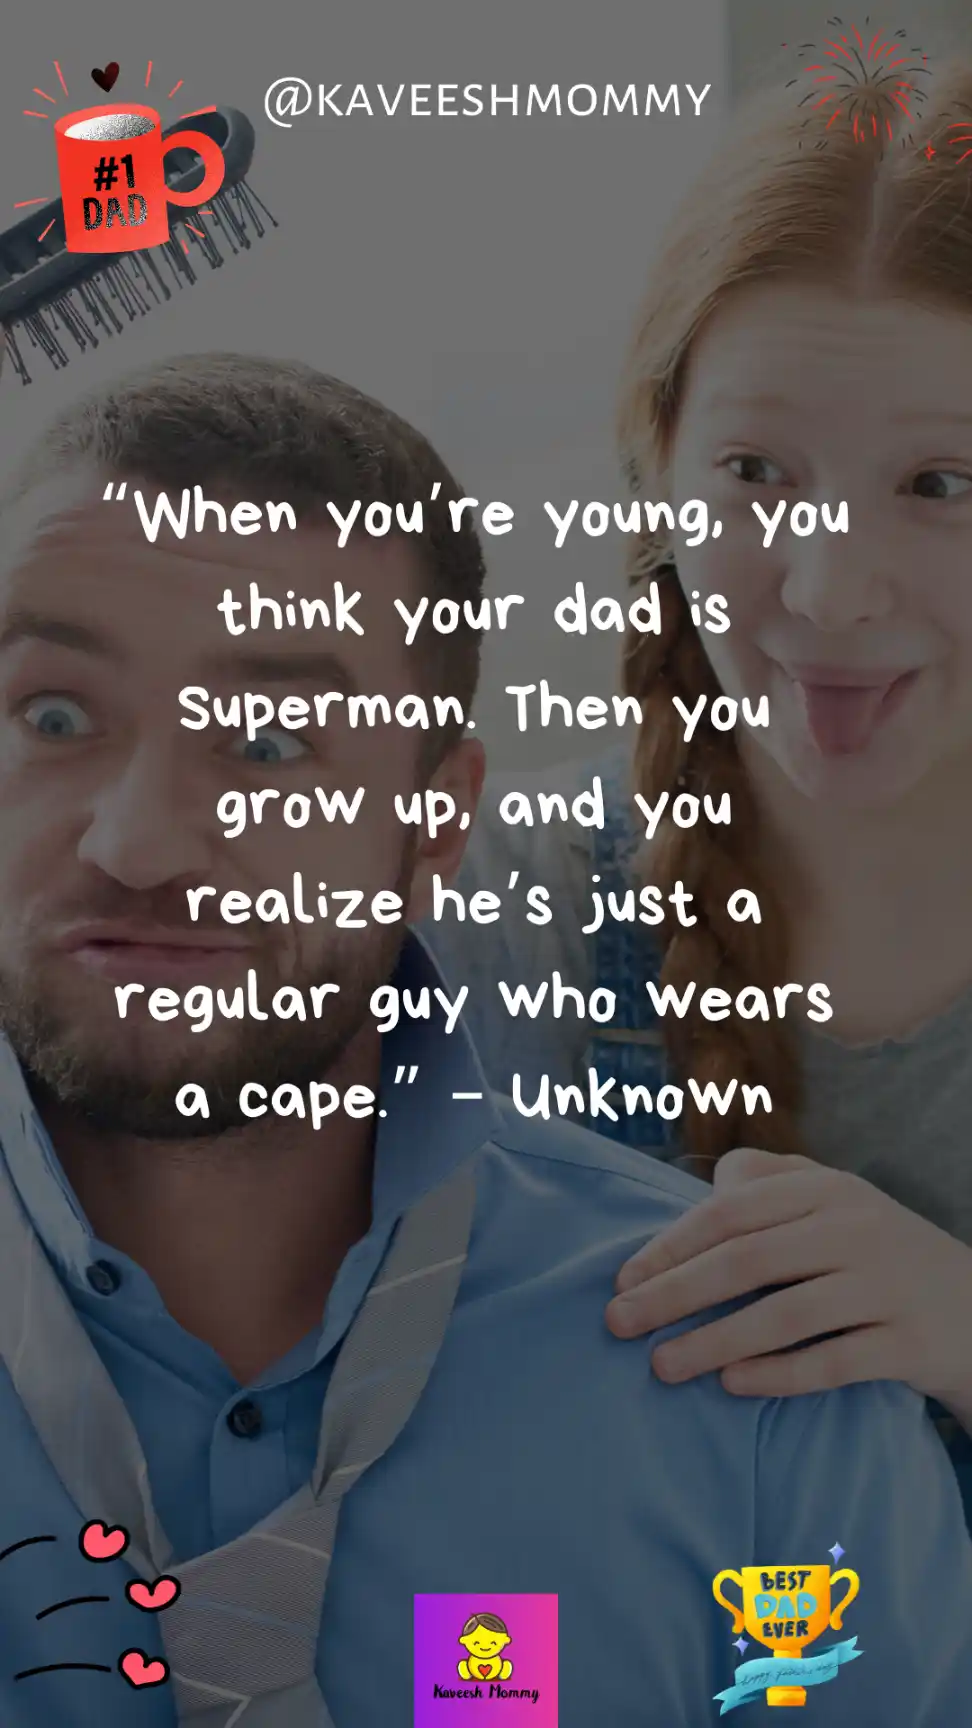 funny fathers day messages from daughter-“When you’re young, you think your dad is Superman. Then you grow up, and you realize he’s just a regular guy who wears a cape.”